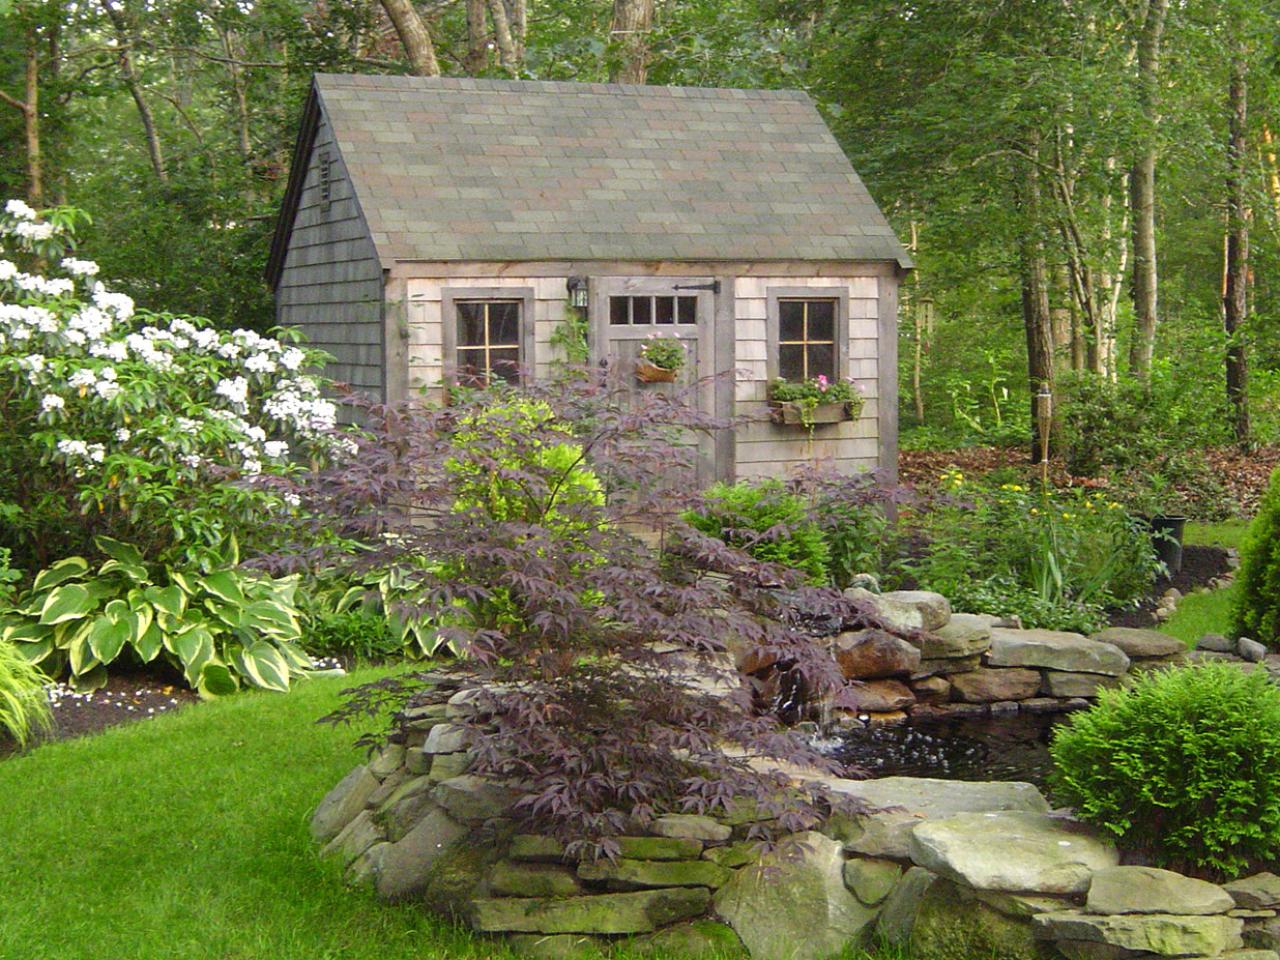 Fairytale garden shed in an obscured place